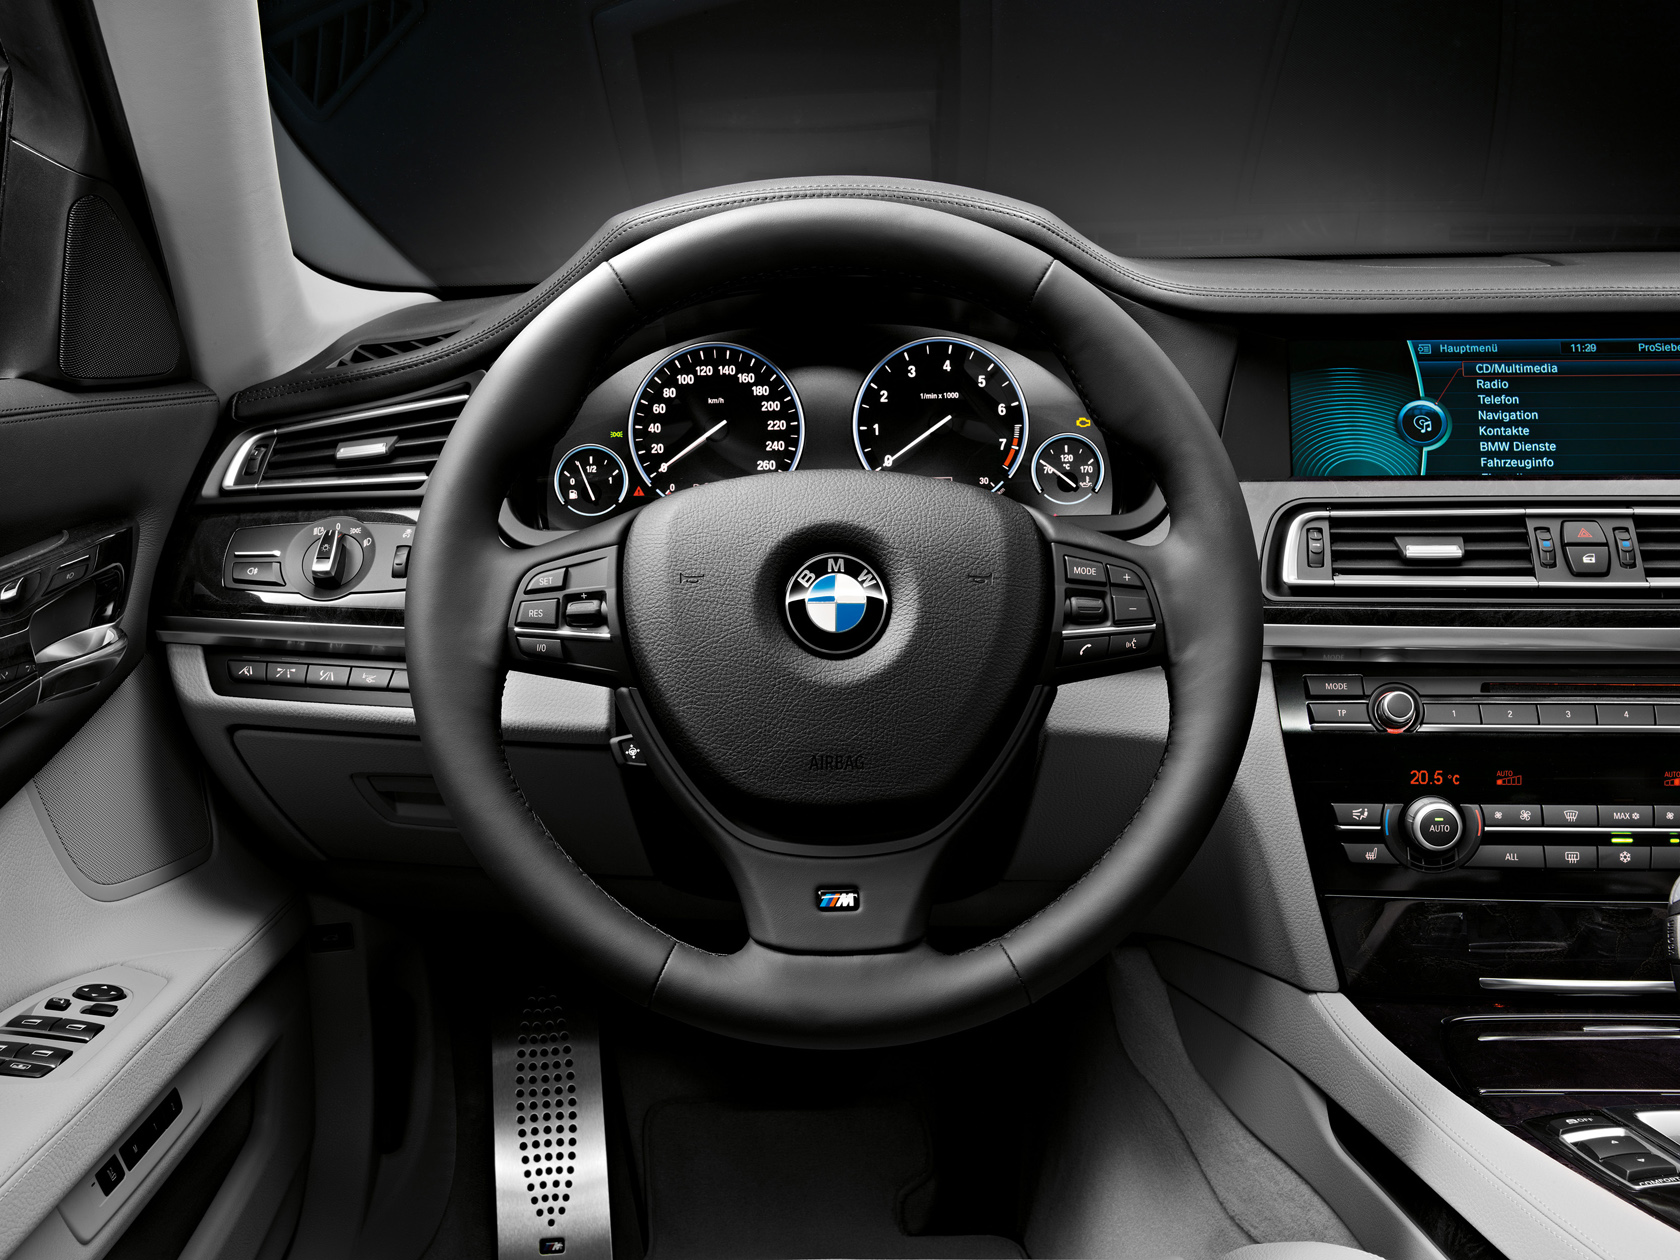 Official: 2010 BMW 7 Series M Sport, BMW 740d and xDrive - 7Post - 7 Series